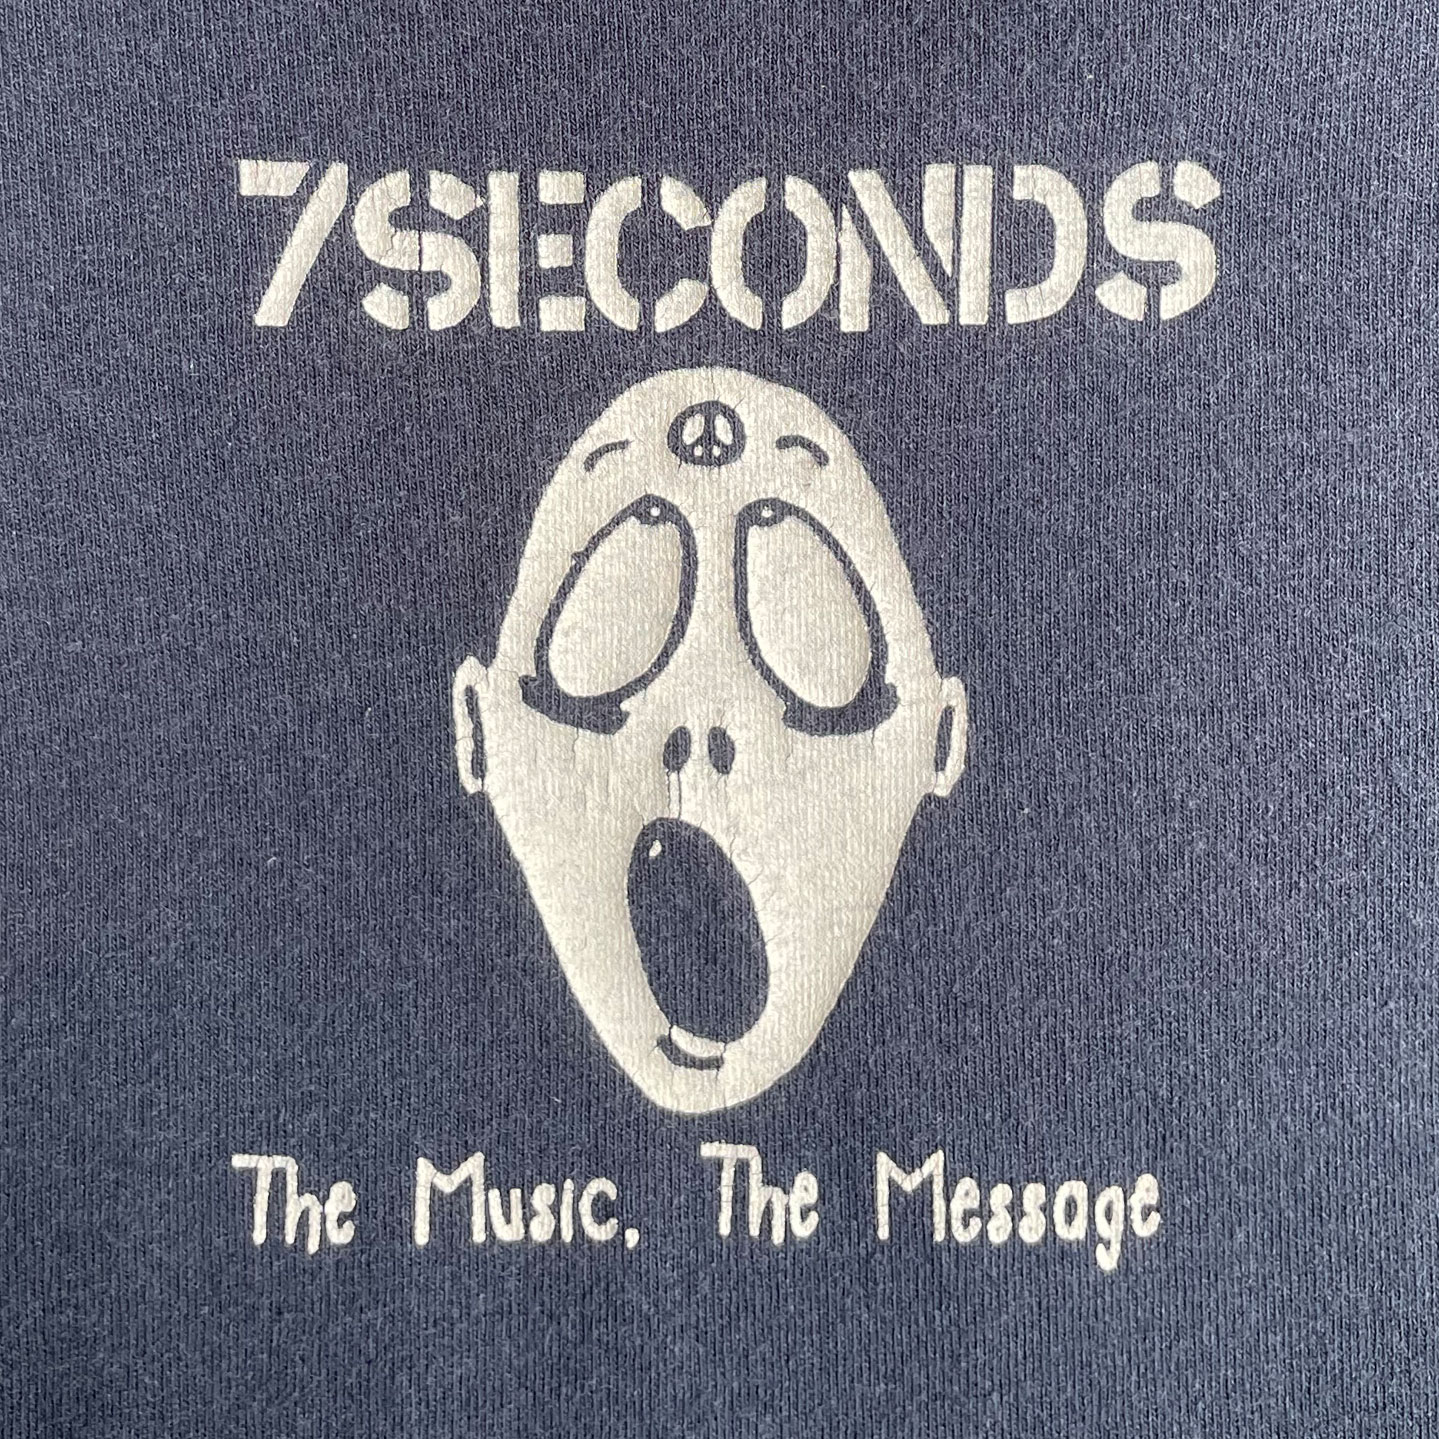 USED! 7SECONDS Tシャツ VINTAGE!